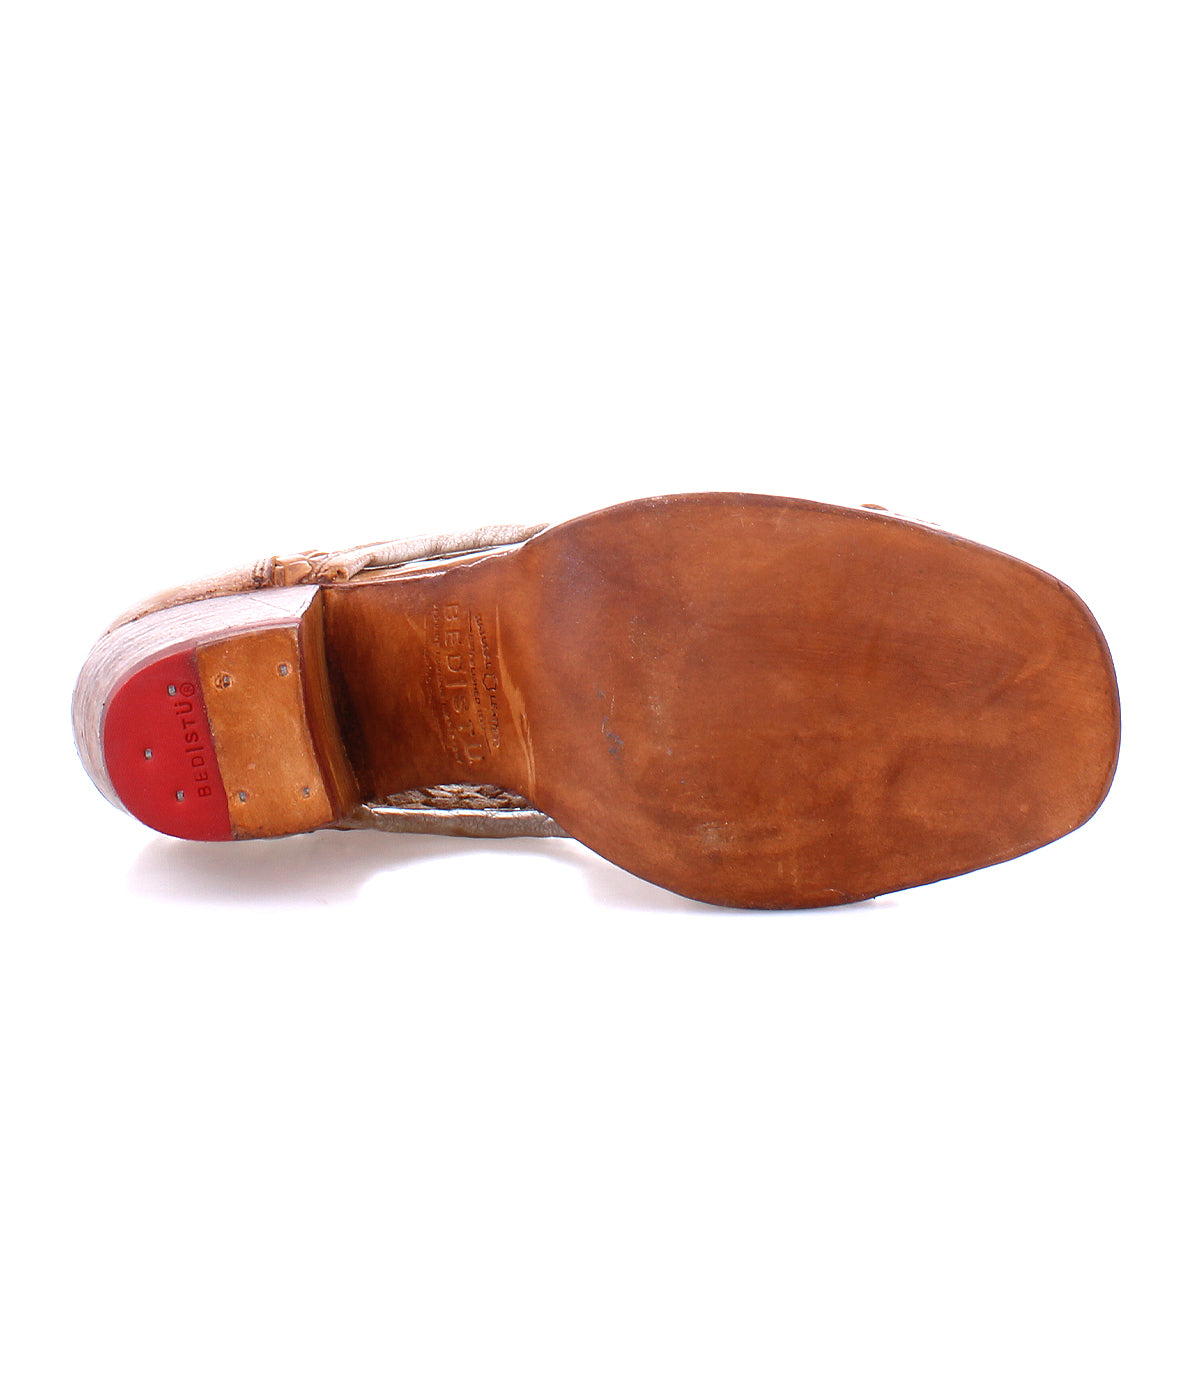 Leather shoe sole with a visible Bed Stu stamp and a hint of red on the heel, showcasing artisan craftsmanship.